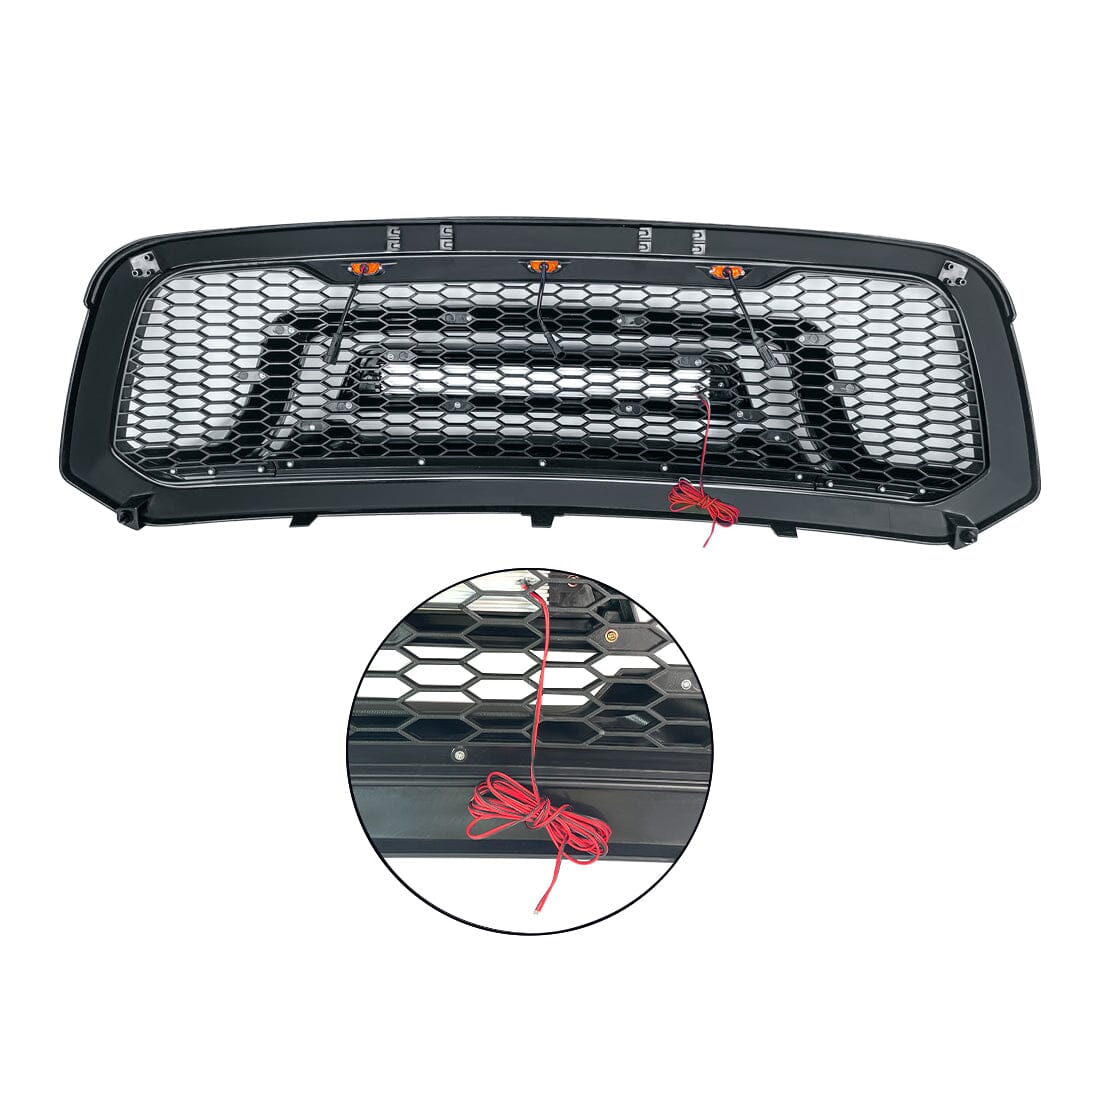 Armor Grille w/Off-Road Lights For 2013-2018 Dodge Ram 1500 | In Stock On May 30